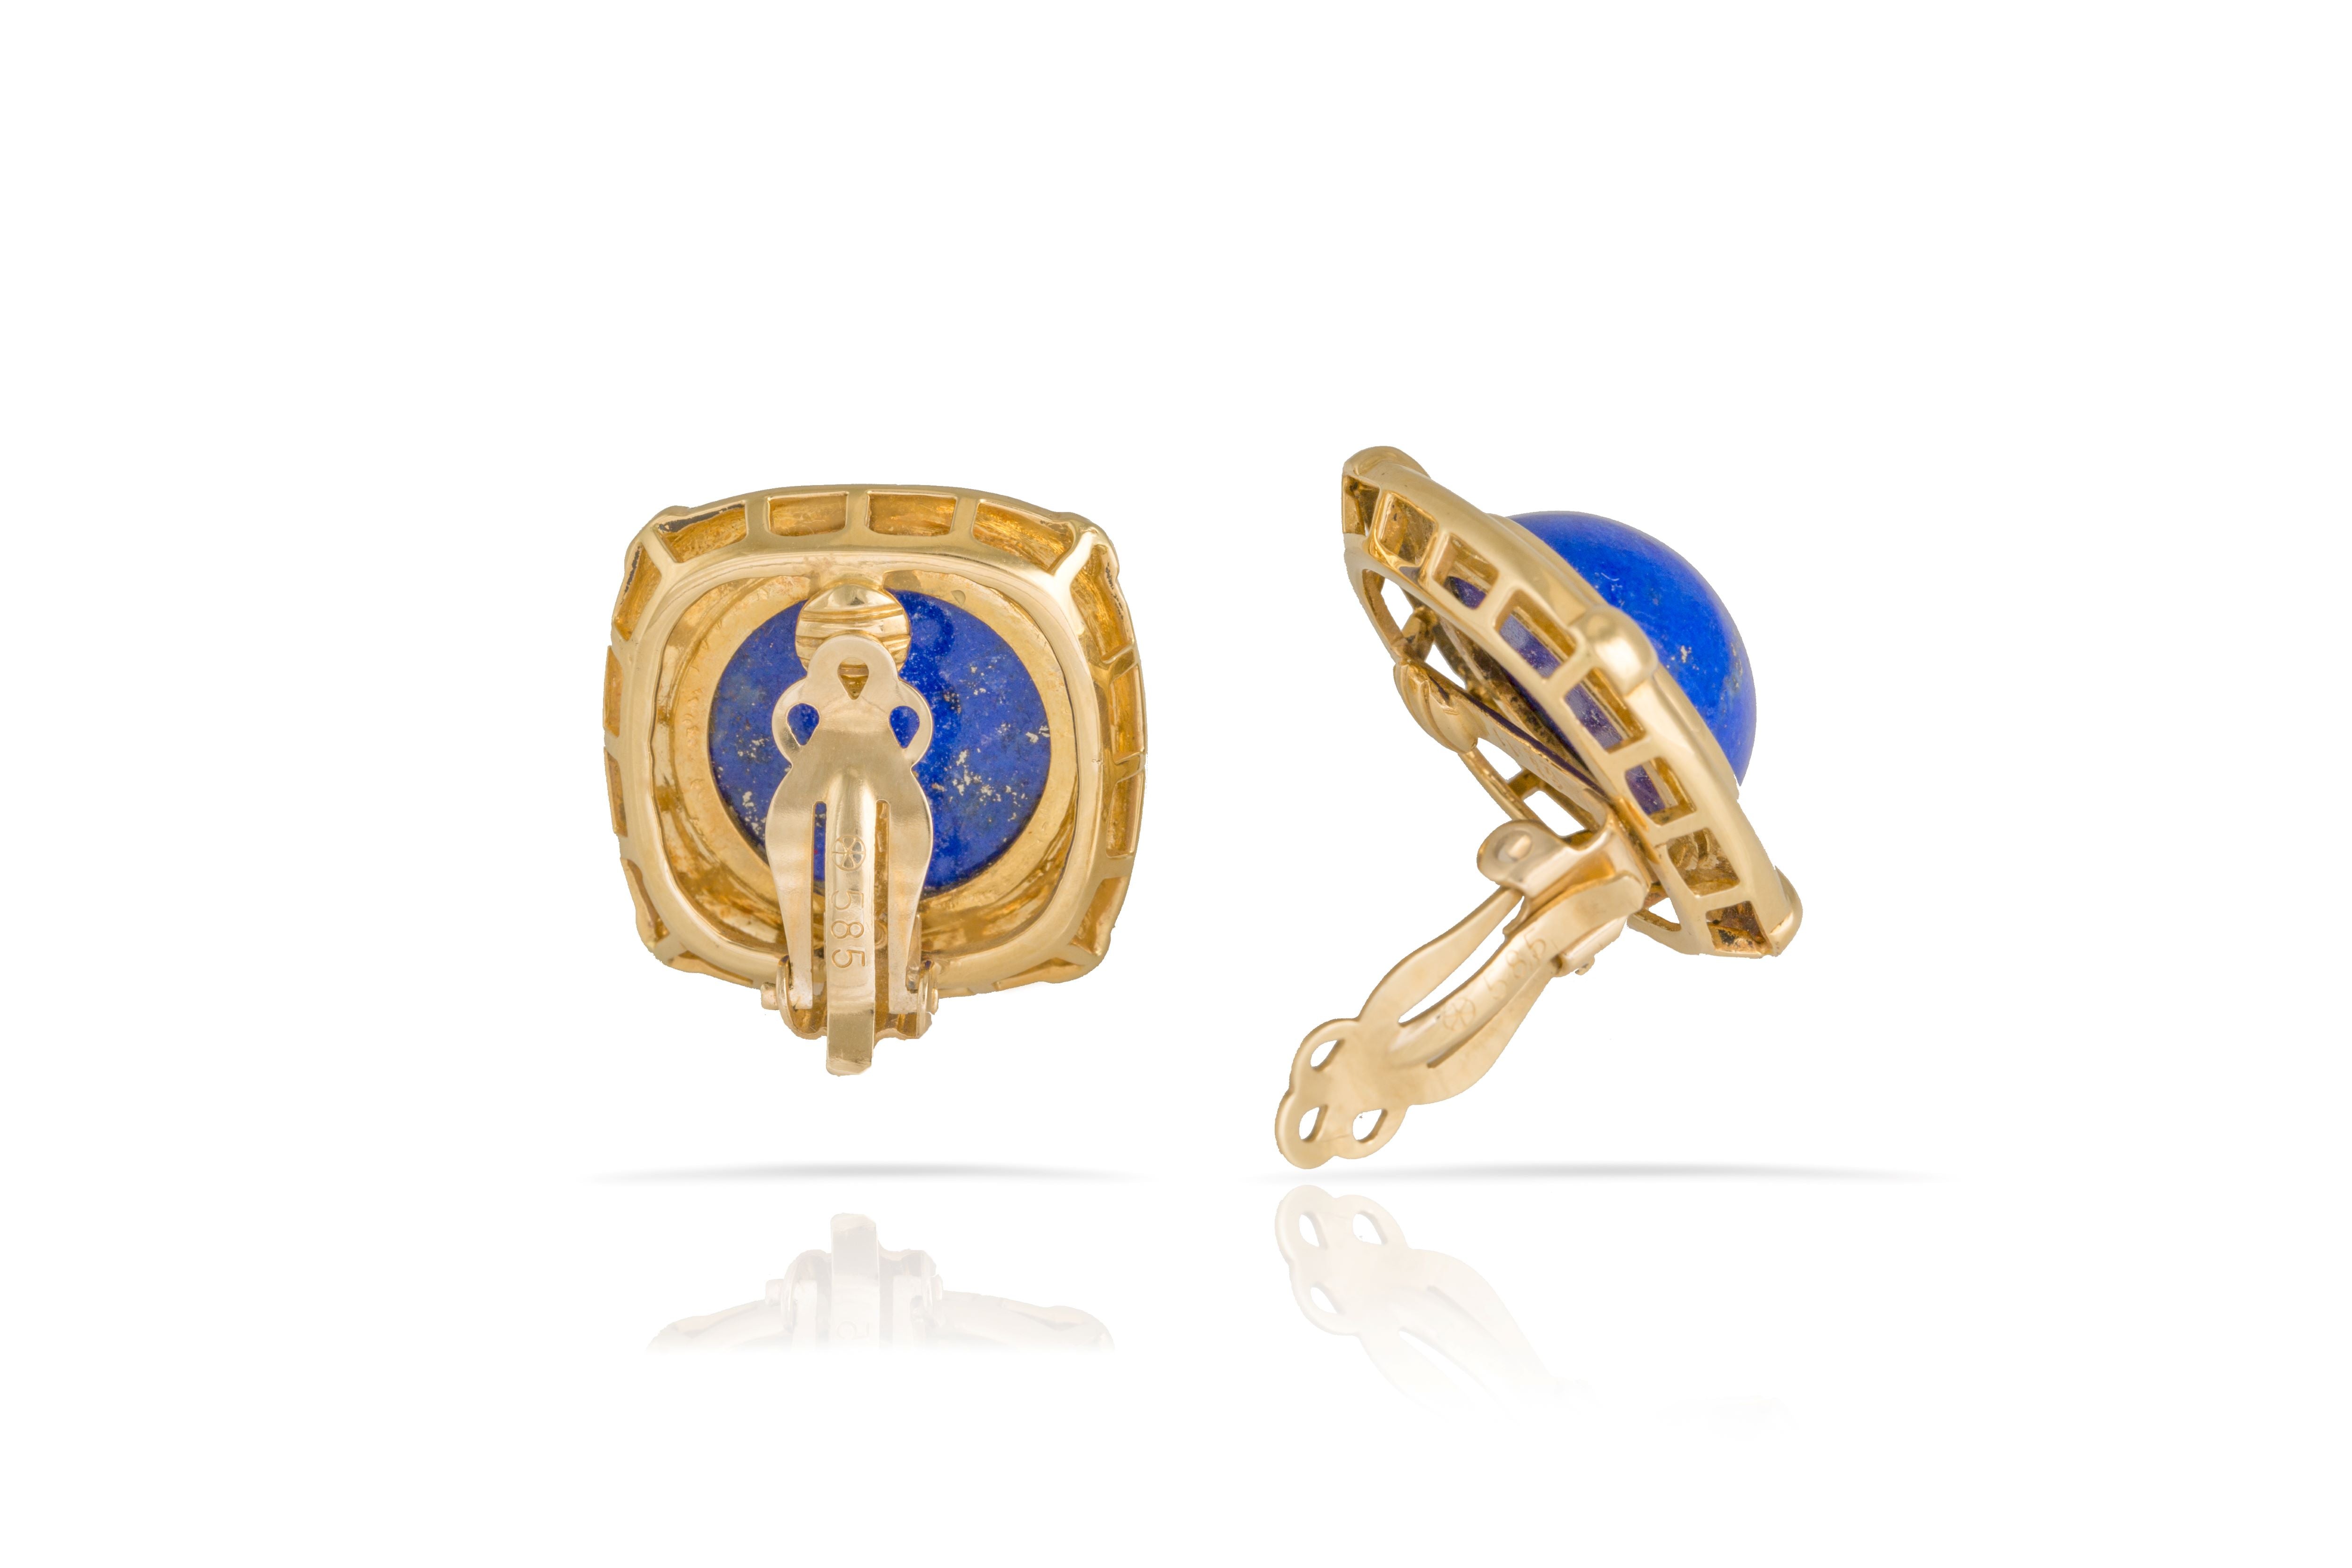 Clip-on closure on vintage 18ct gold earrings with lapis lazuli. 